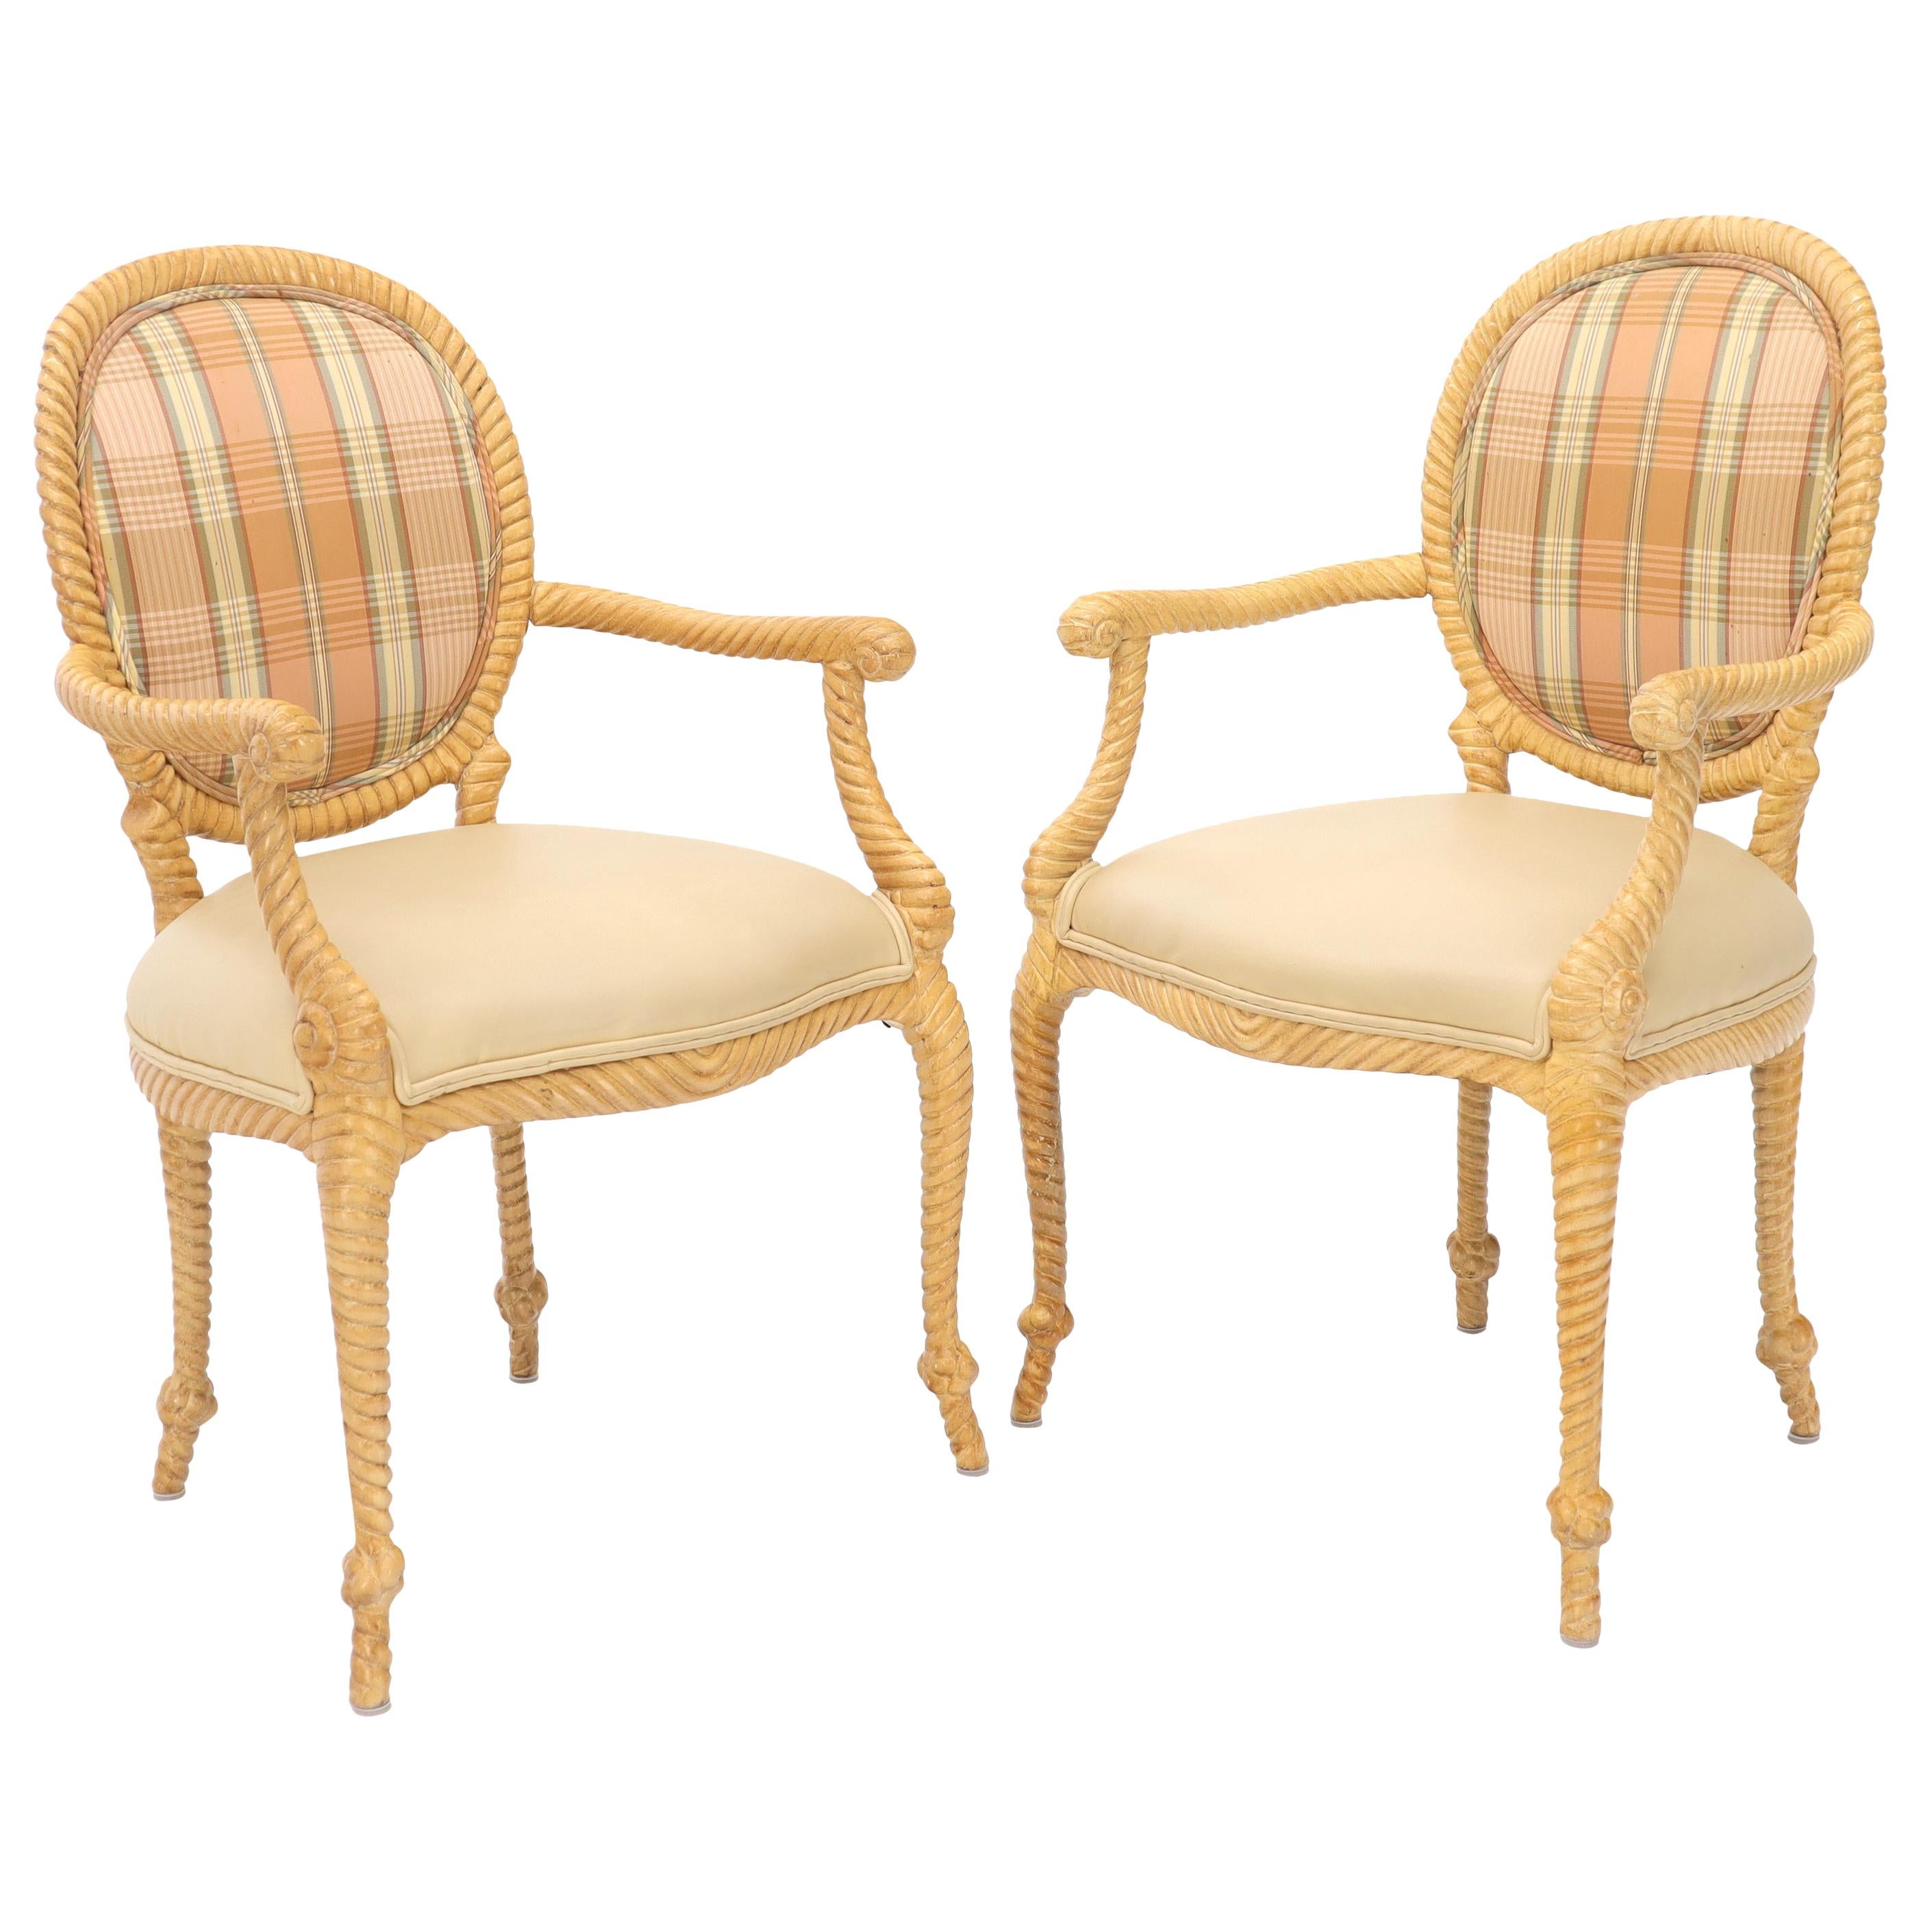 Pair of Twisted Rope Carved Wood Decorative Chairs For Sale